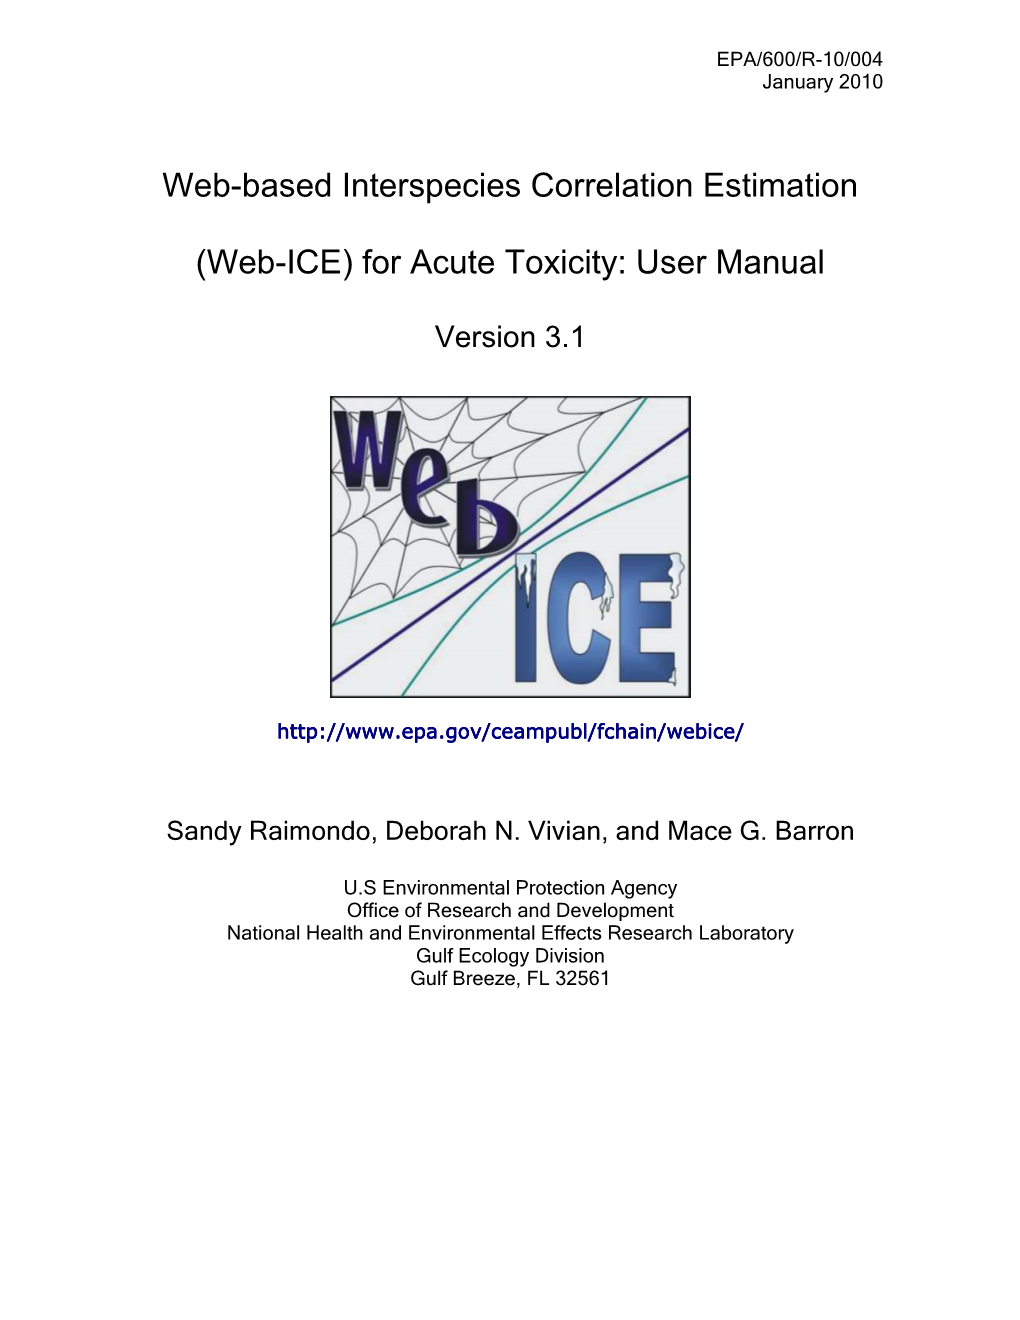 (Web-ICE) for Acute Toxicity: User Manual